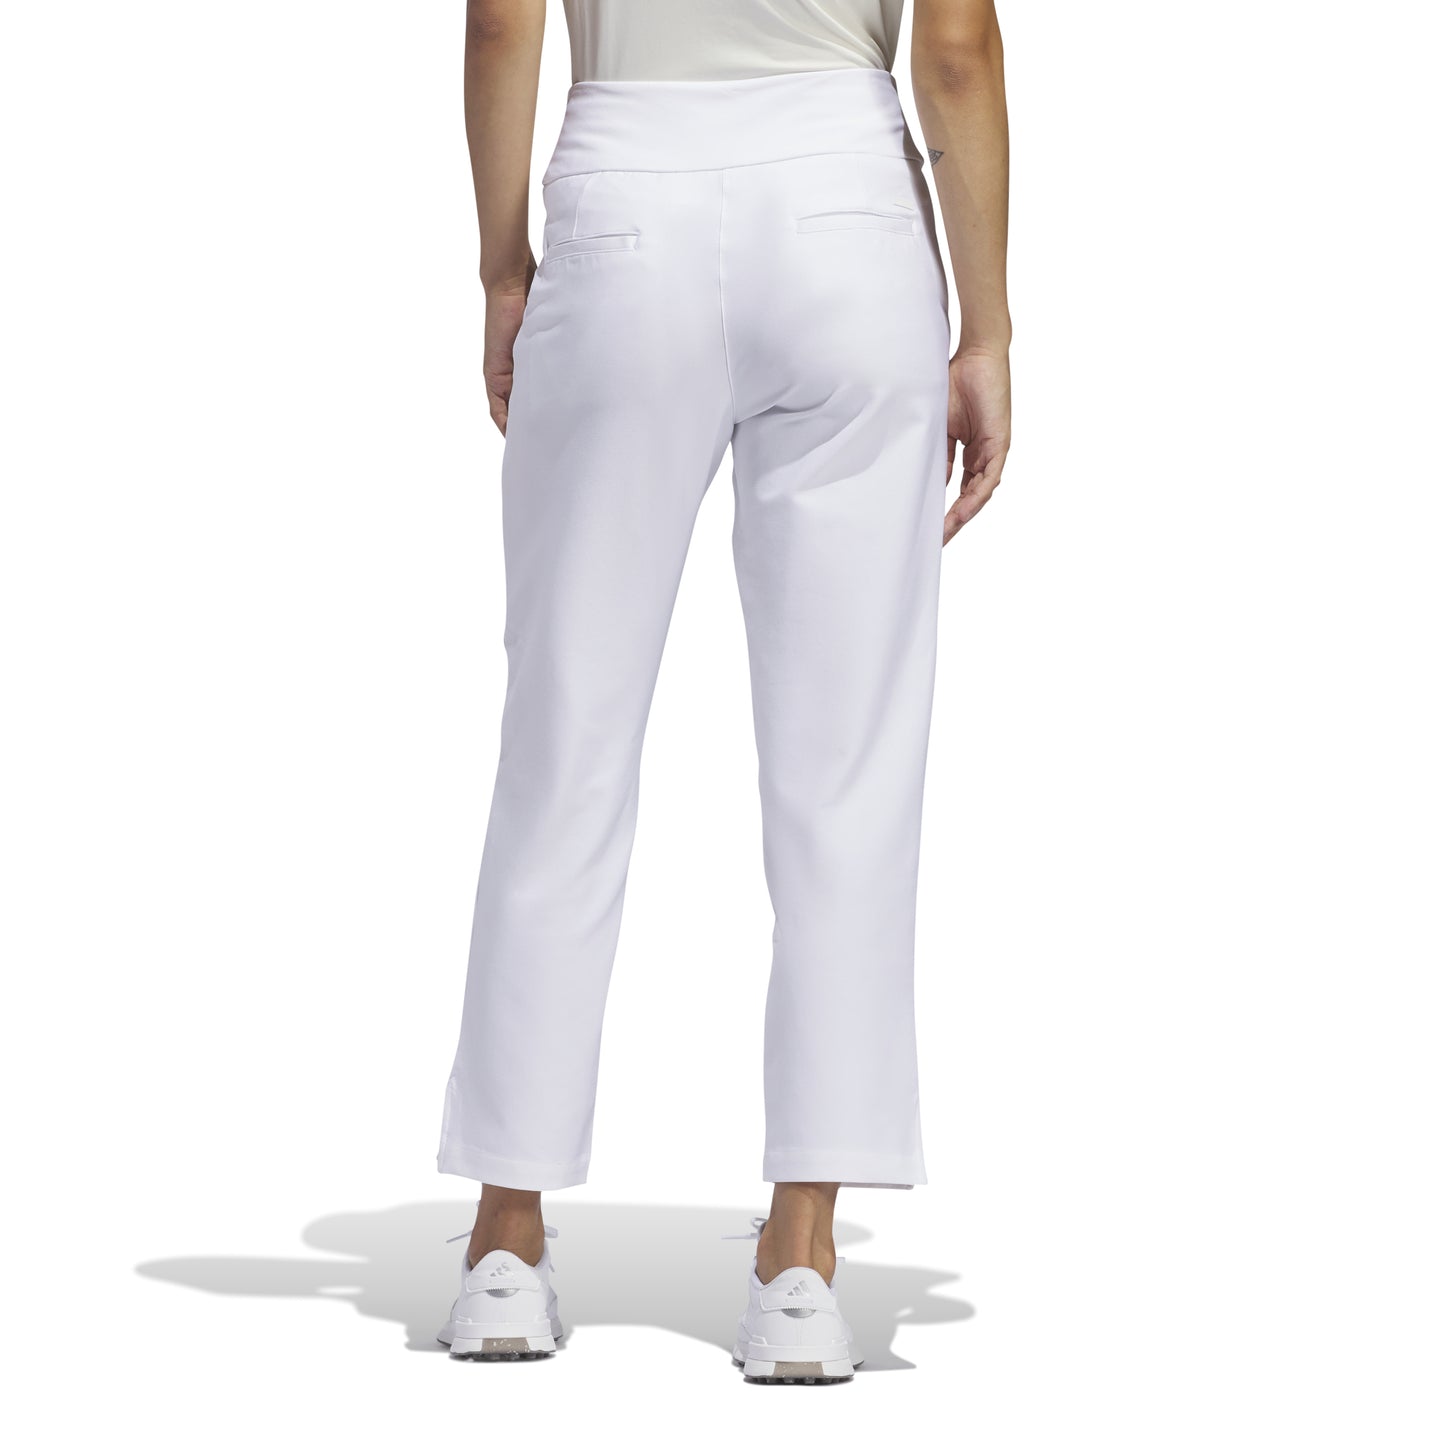 adidas Ladies 7/8 Golf Trousers in White